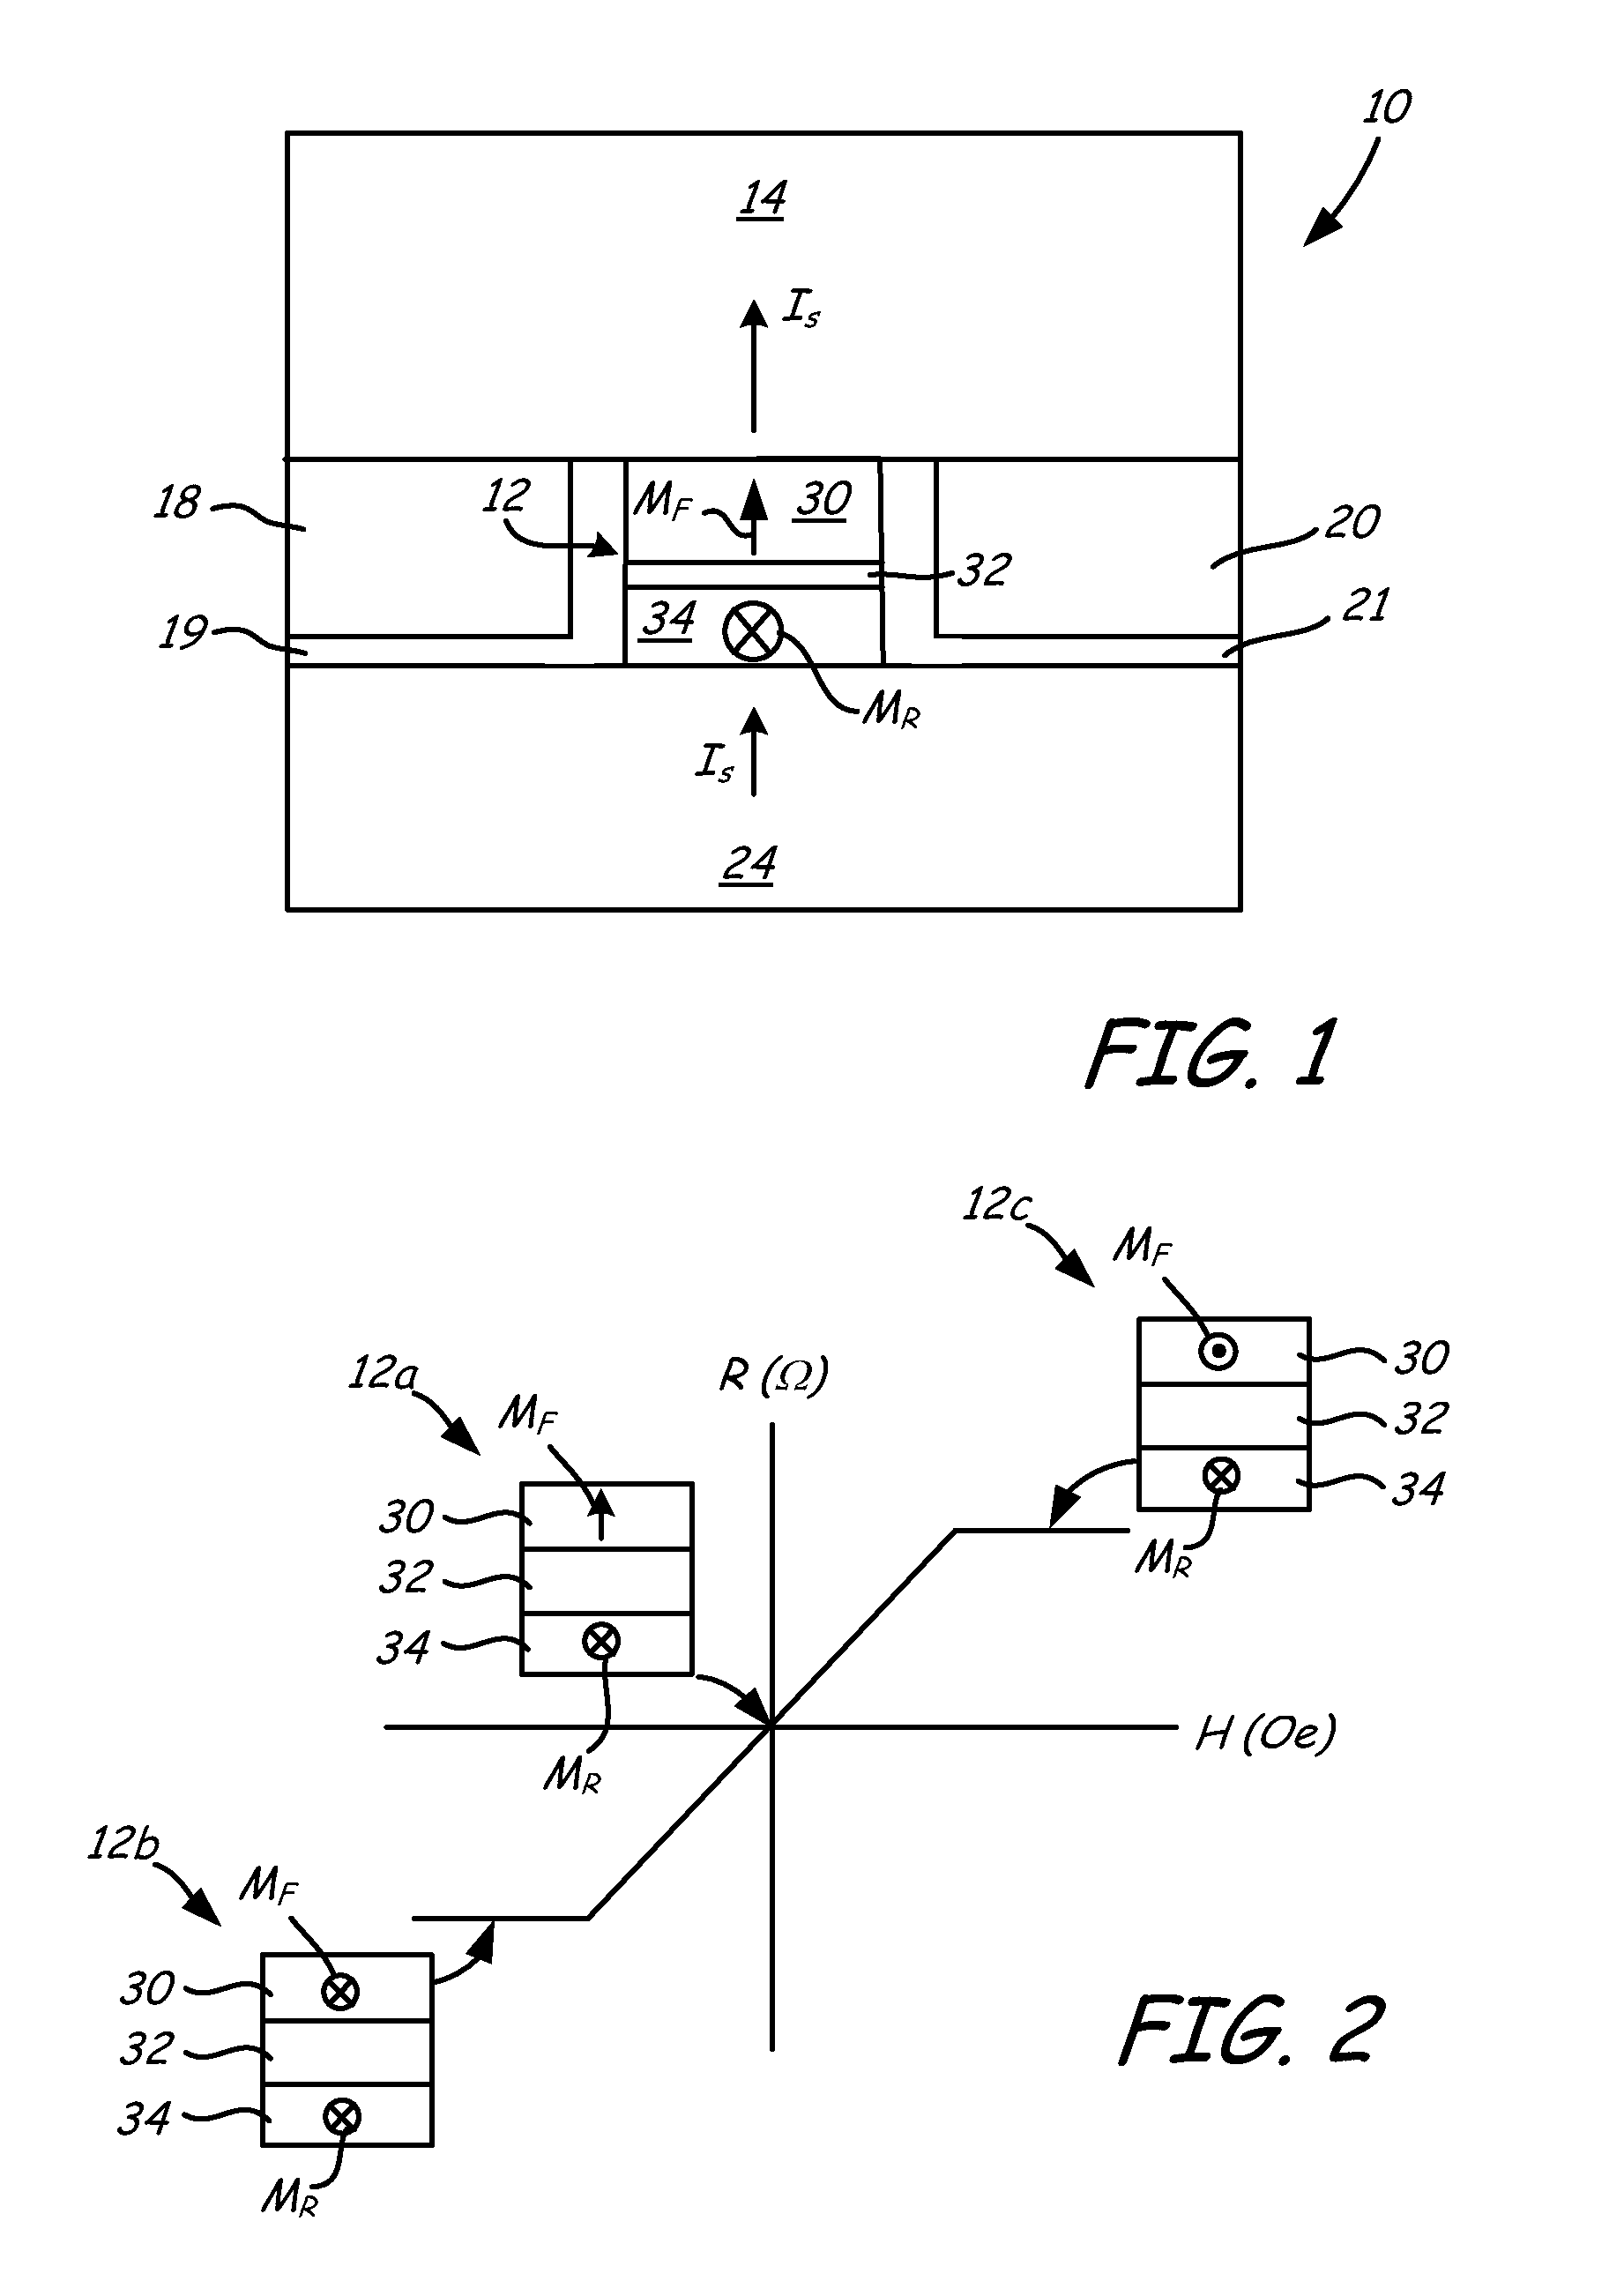 Magnetic sensor with perpendicular anisotrophy free layer and side shields